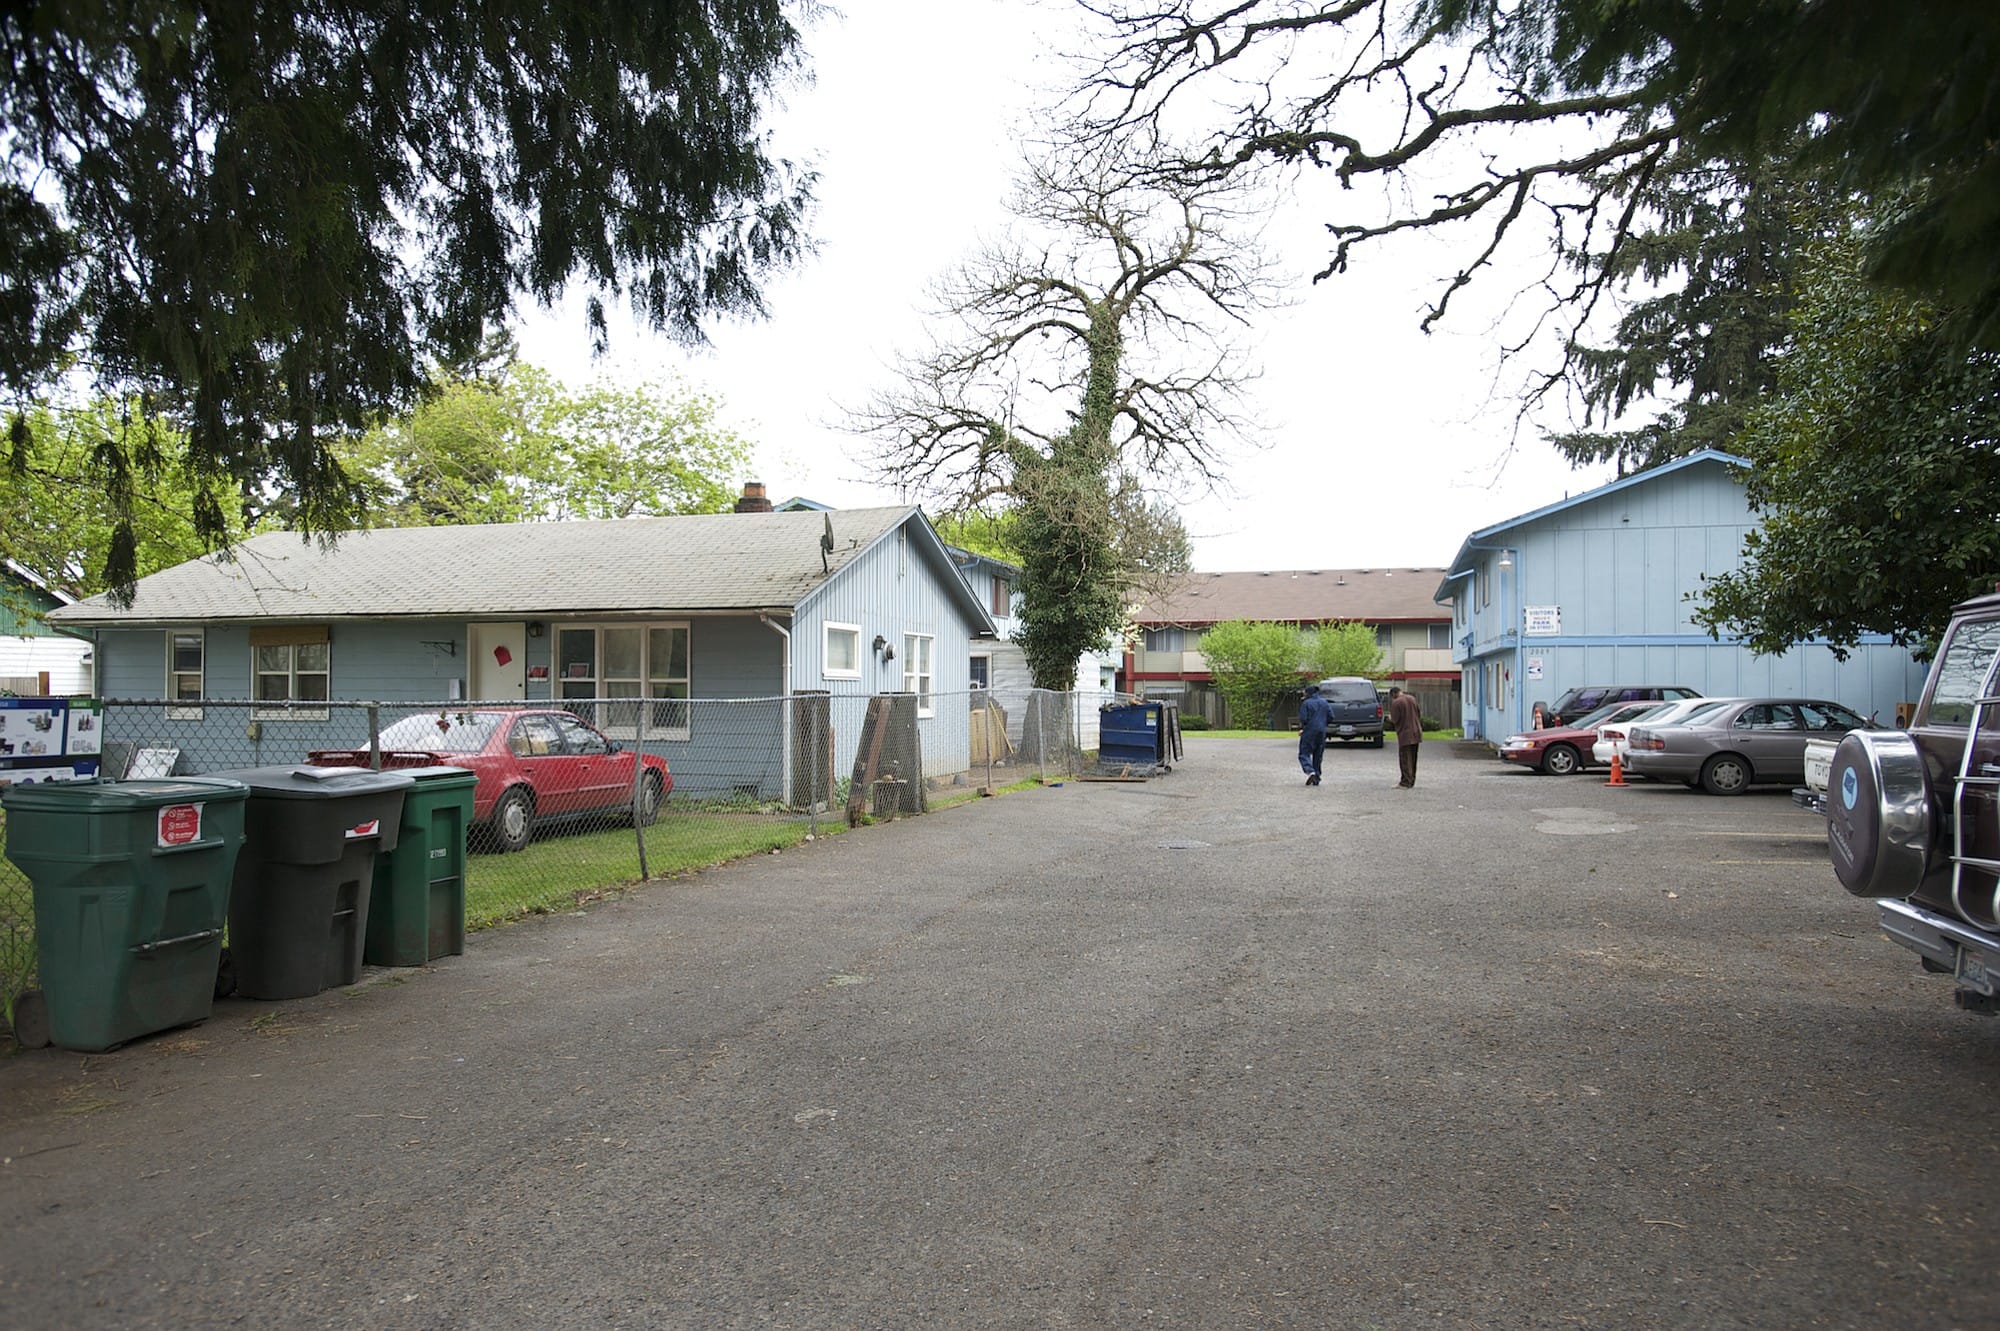 This small apartment complex at 2015 Norris Road and a neighboring standalone house have been condemned by the city as unsafe.